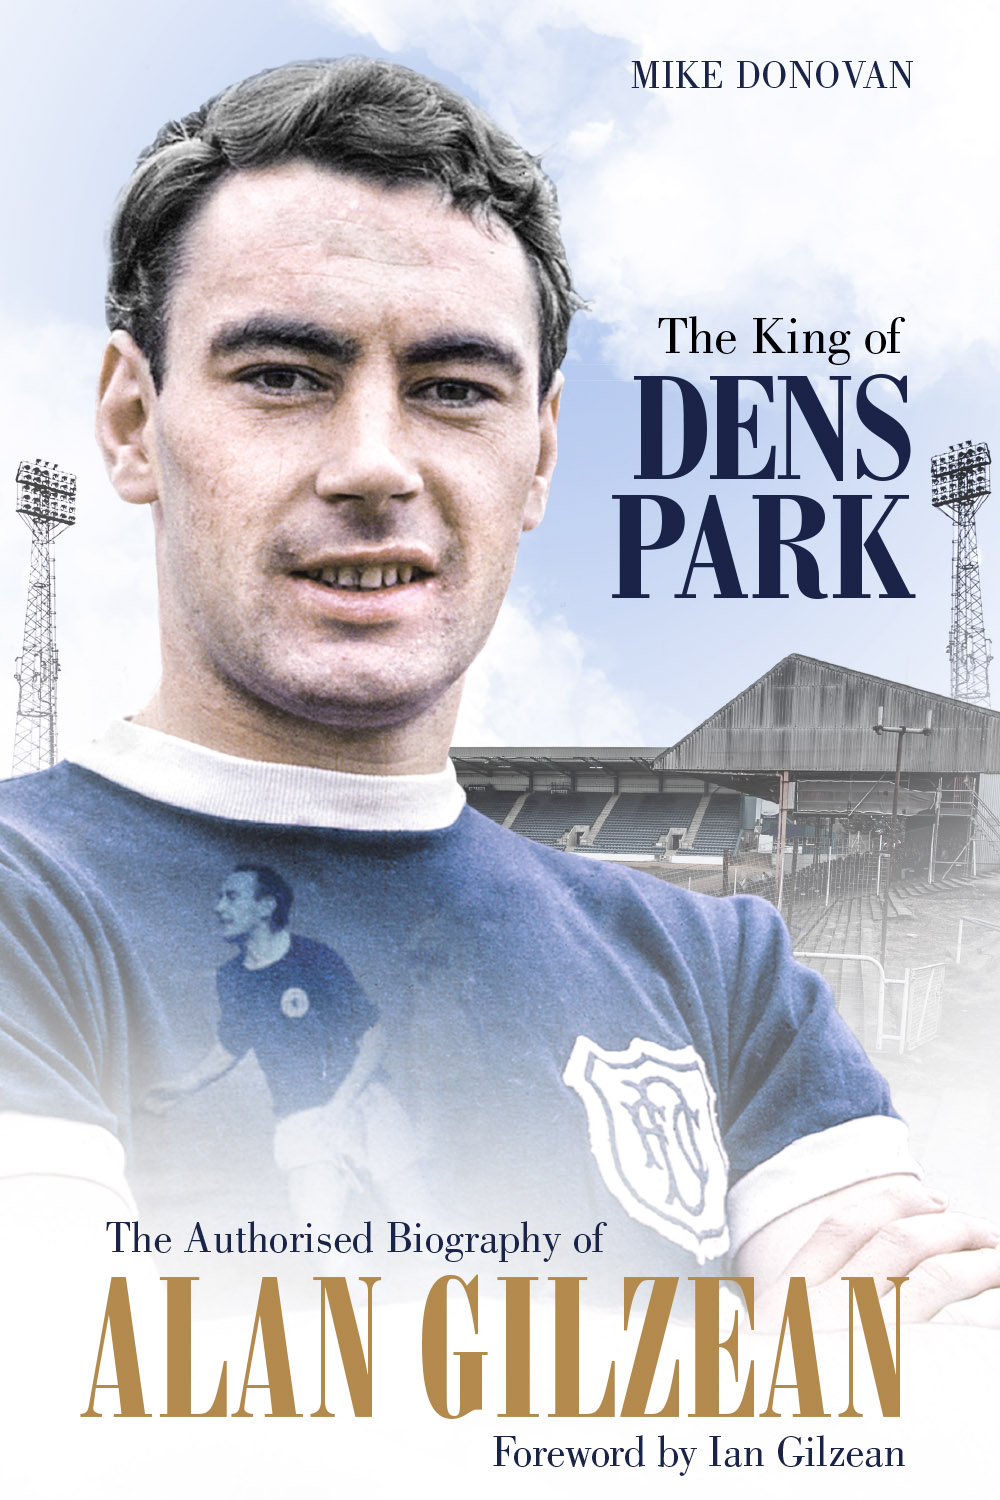 THE KING OF DENS PARK